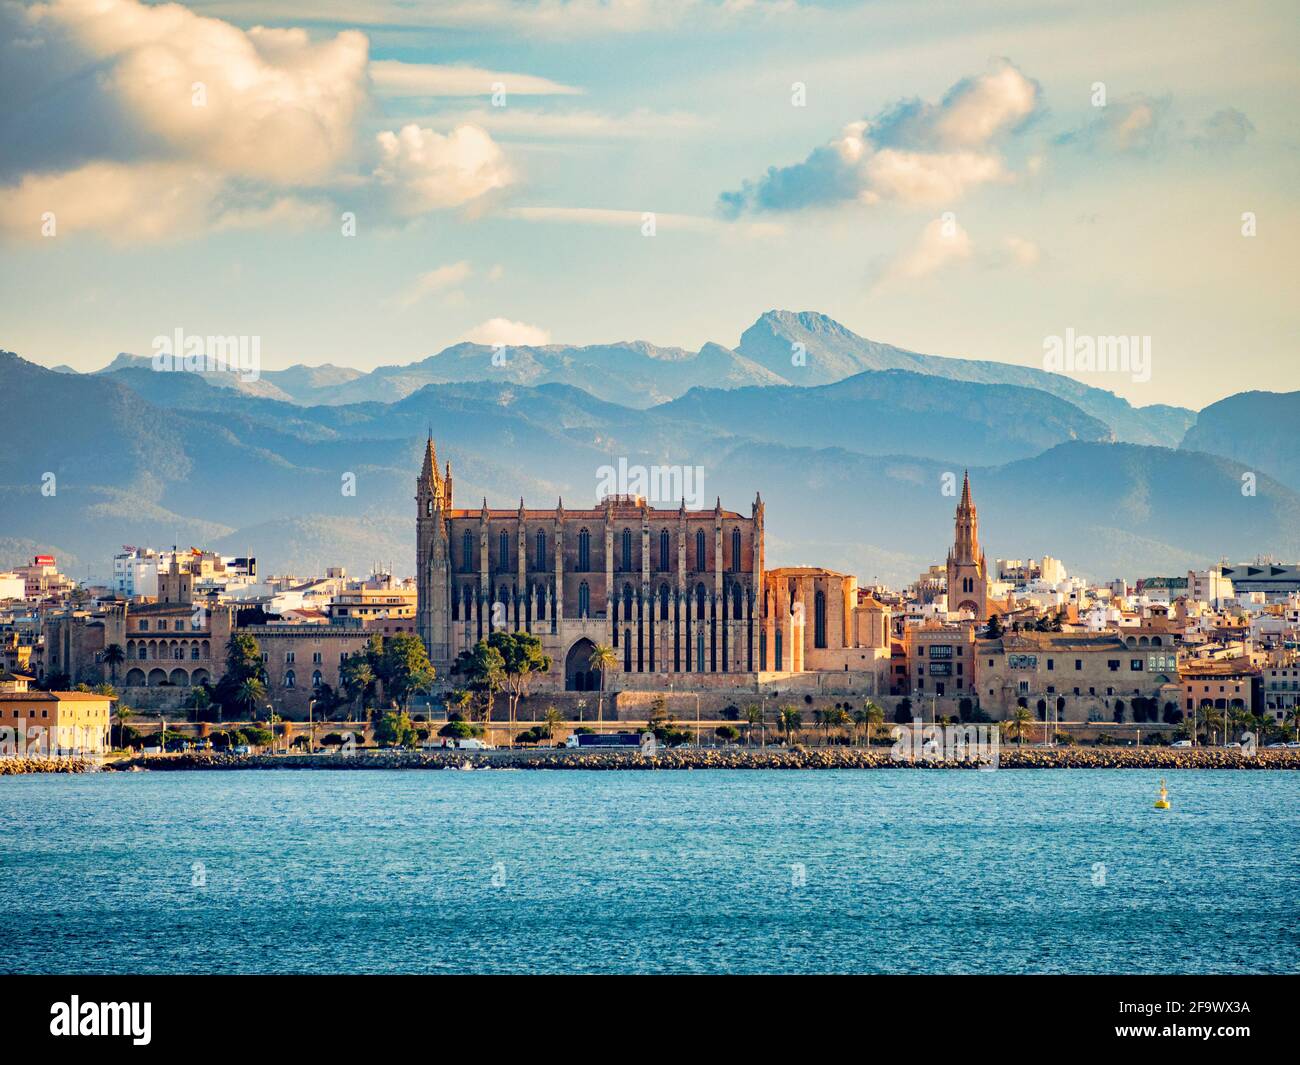 6 March 2020: Palma, Majorca, Spain - View of Mallorca Cathedral from a  ship in the harbour, against a mountain backdrop Stock Photo - Alamy